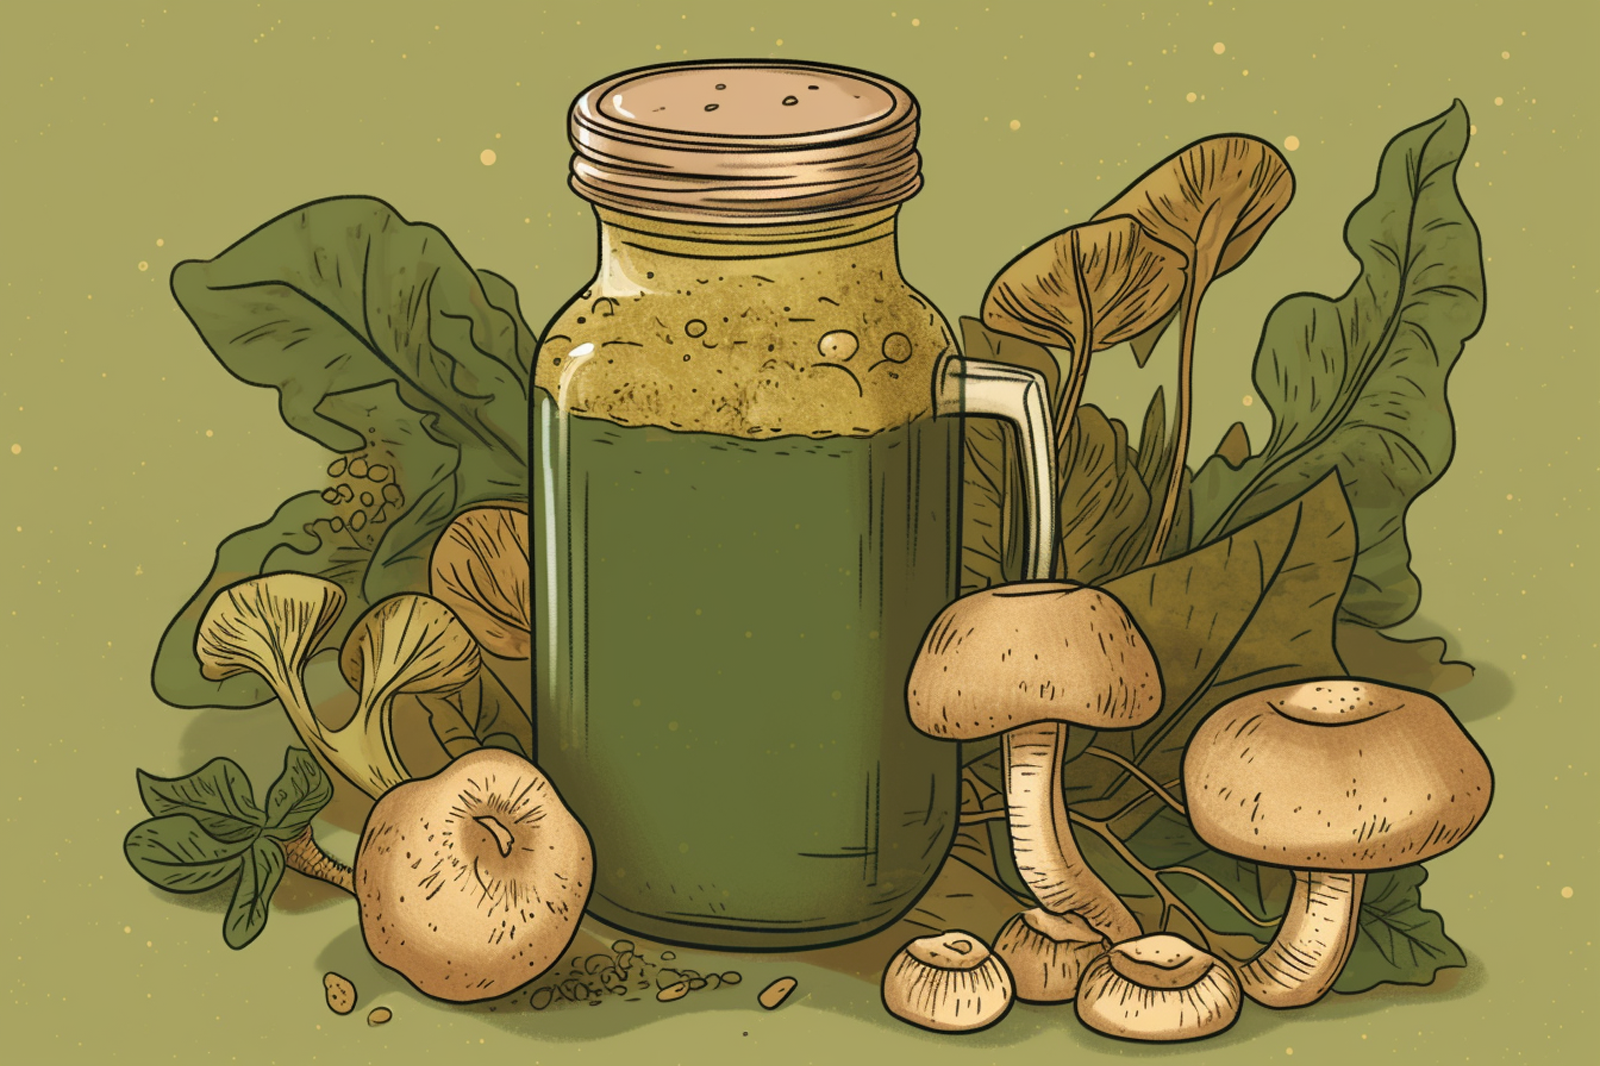 Illustration of a green smoothie with mushrooms and leaves next to it.